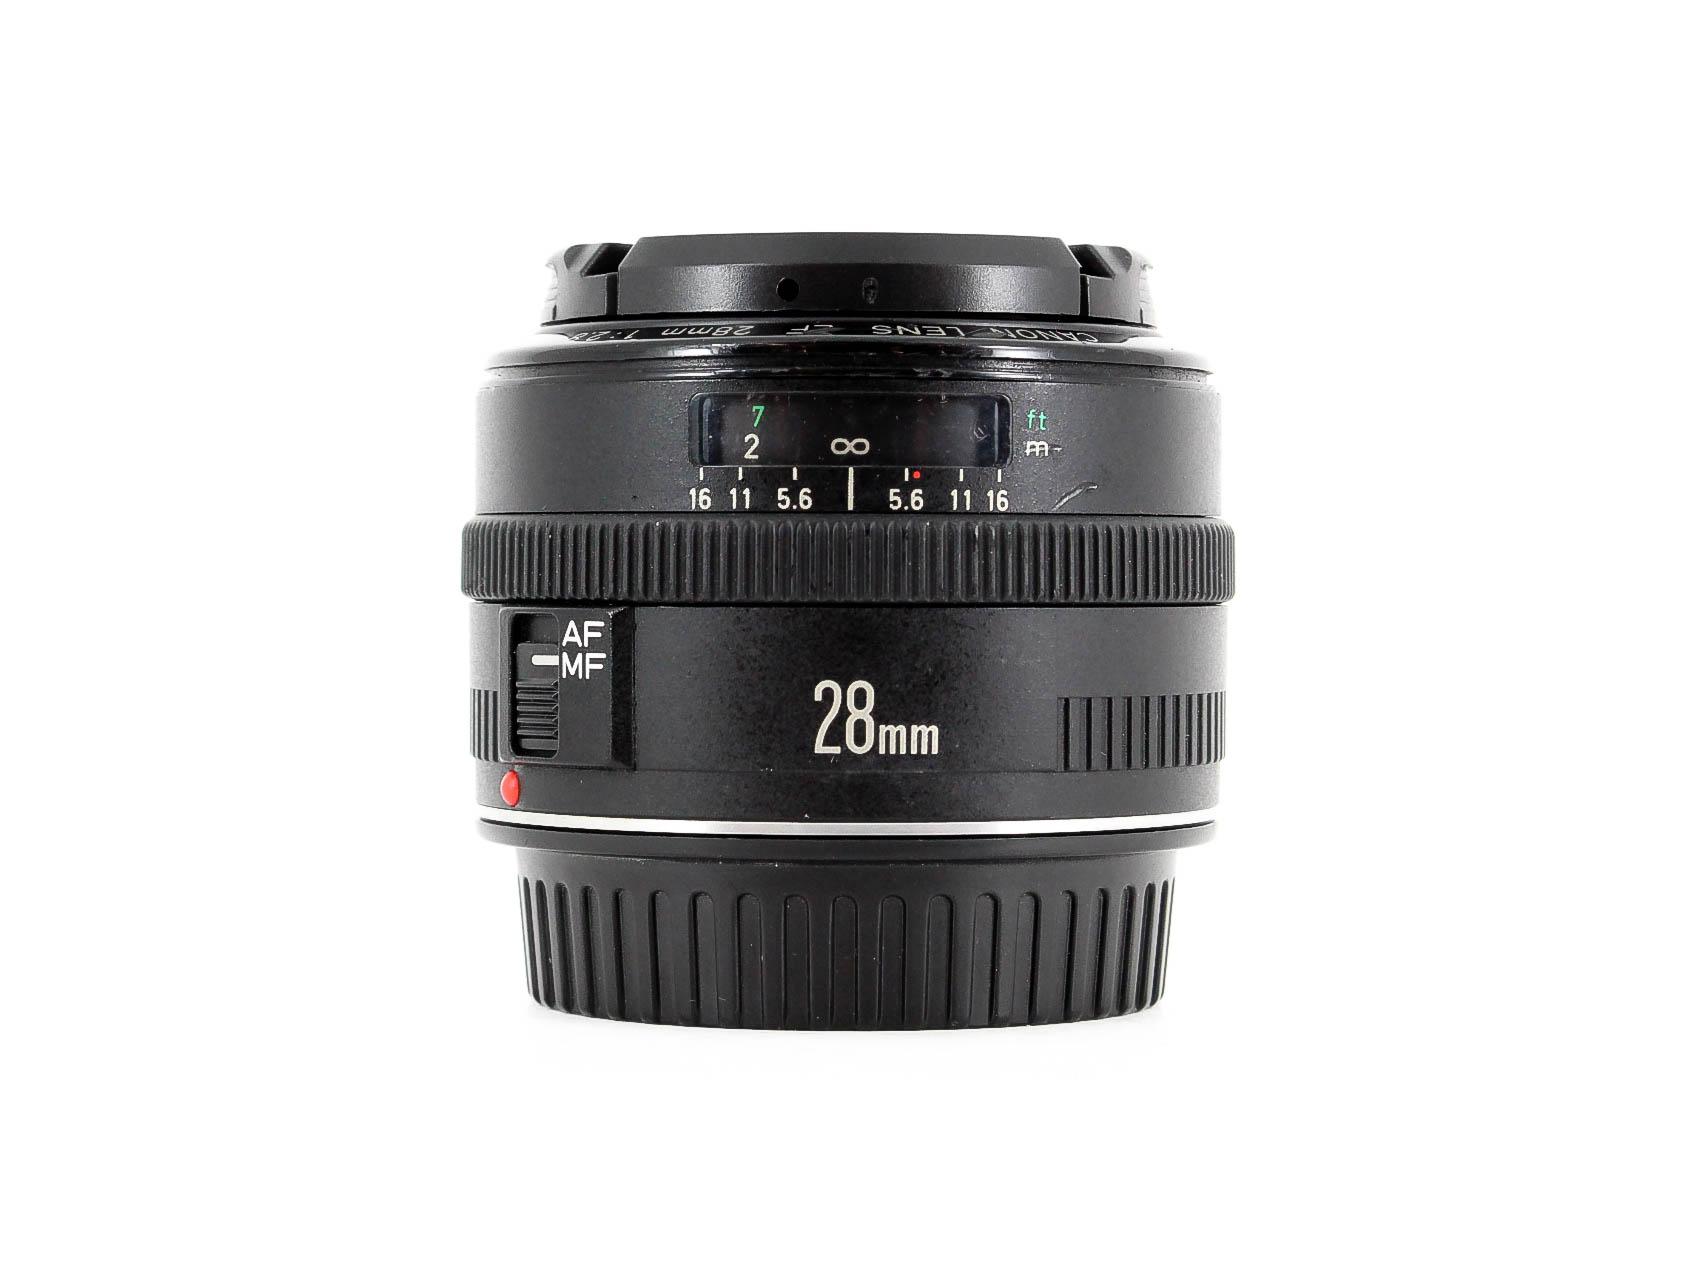 Canon EF 28mm f/2.8 Lens - Lenses and Cameras